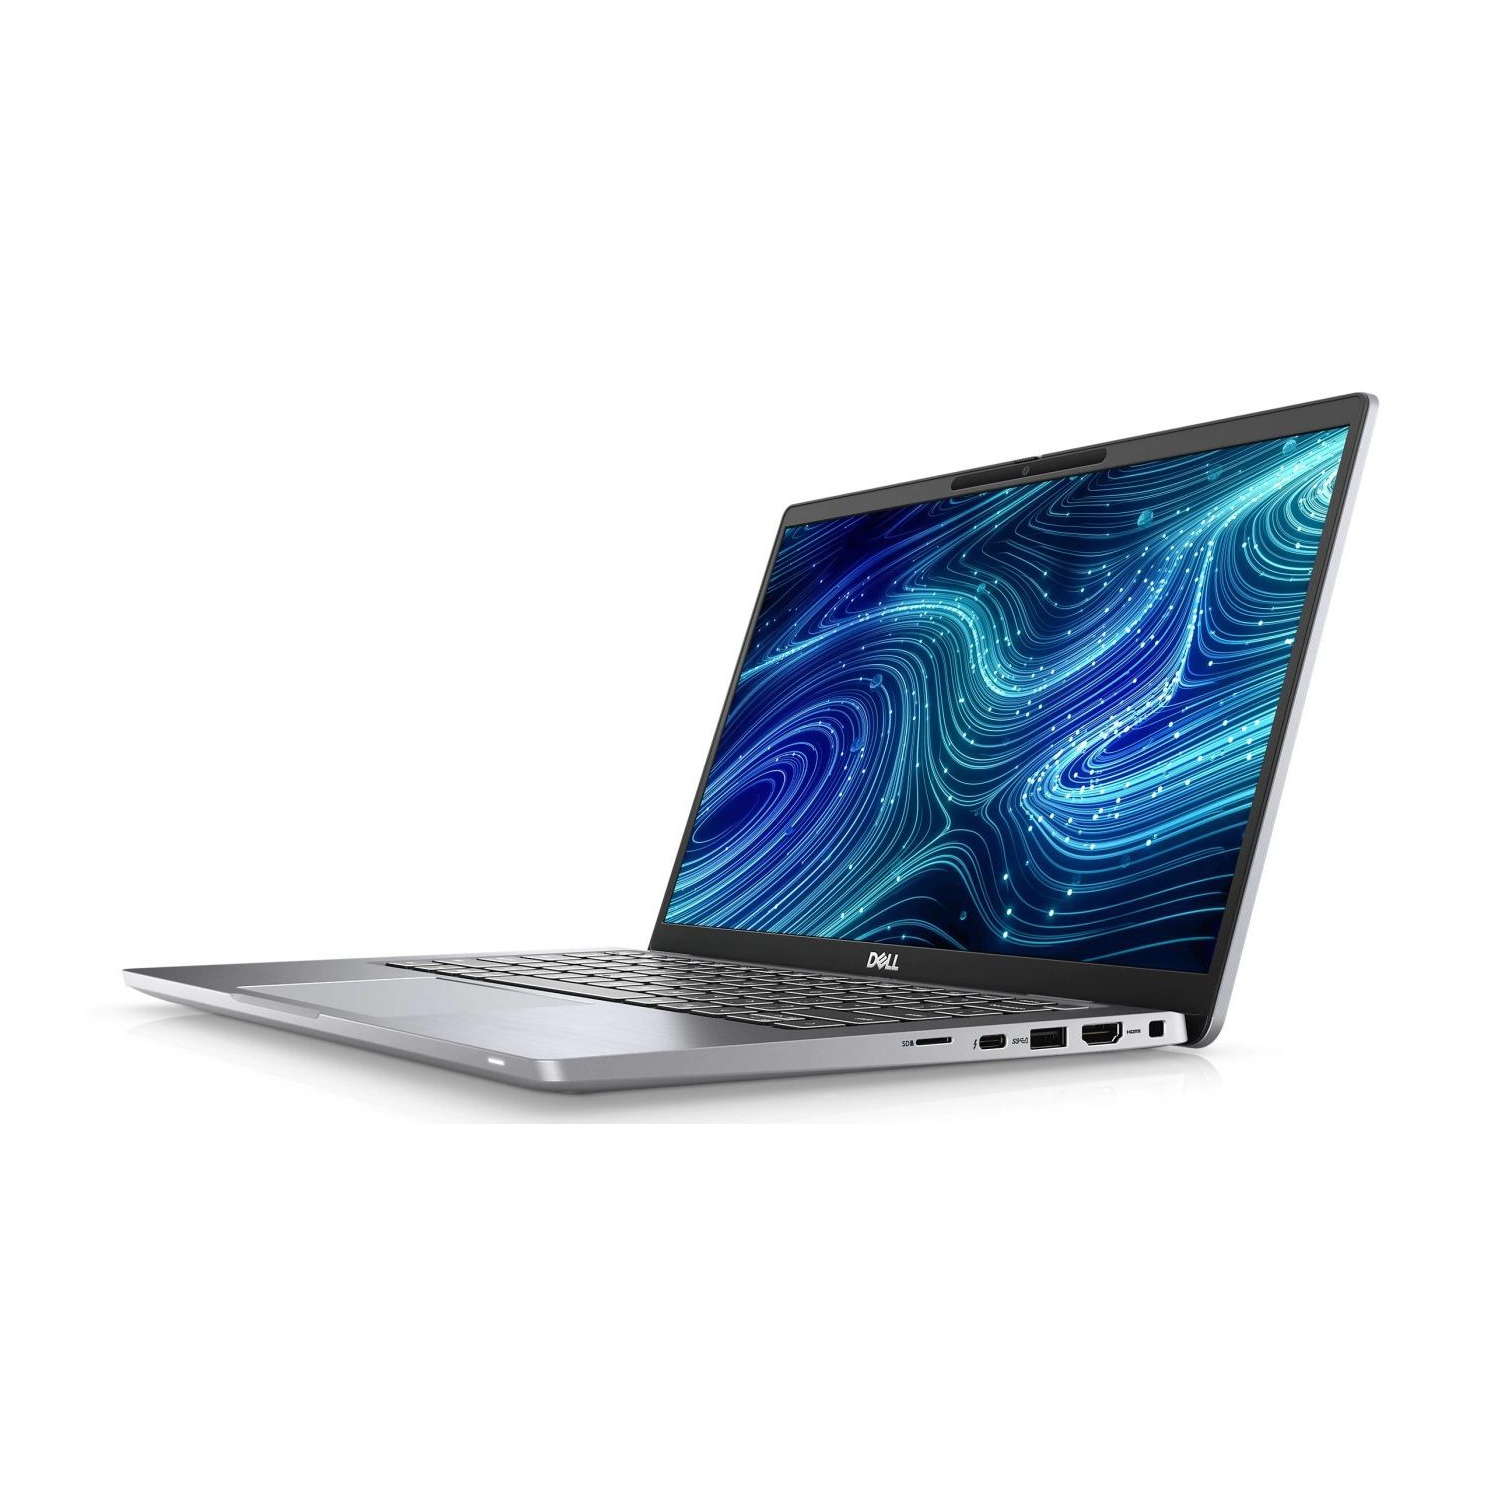 Refurbished (Excellent) - Dell Latitude 7000 7420 Laptop (2021) | 14" FHD Touch | Core i7 - 512GB SSD - 16GB RAM | 4 Cores @ 4.7 GHz - 11th Gen CPU Certified Refurbished